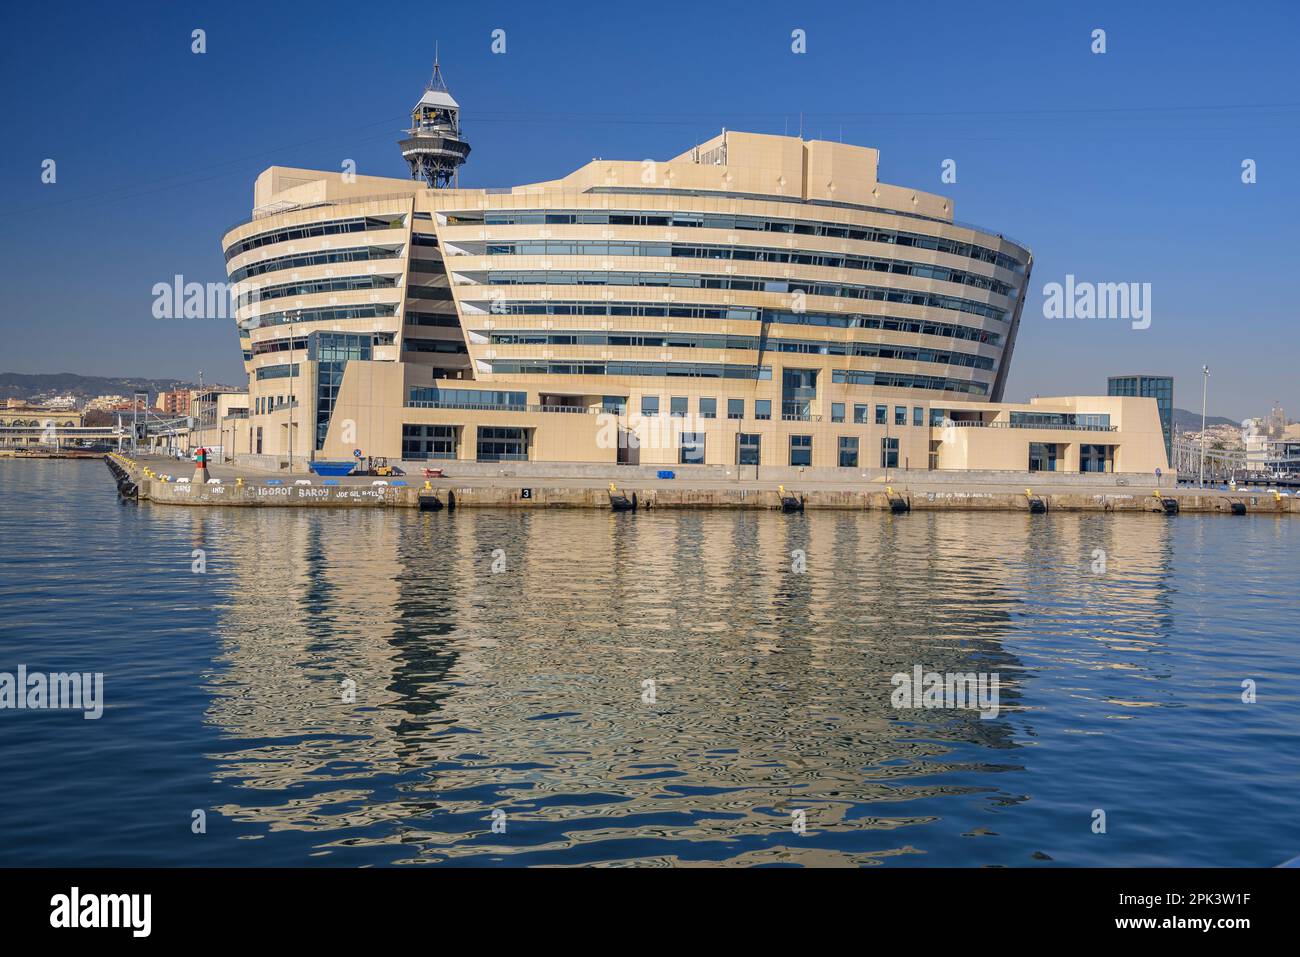 World Trade Center building in the Port Vell (old port) of Barcelona (Catalonia, Spain) ESP Edificio del World Trade Center en el Port Vell BCN España Stock Photo